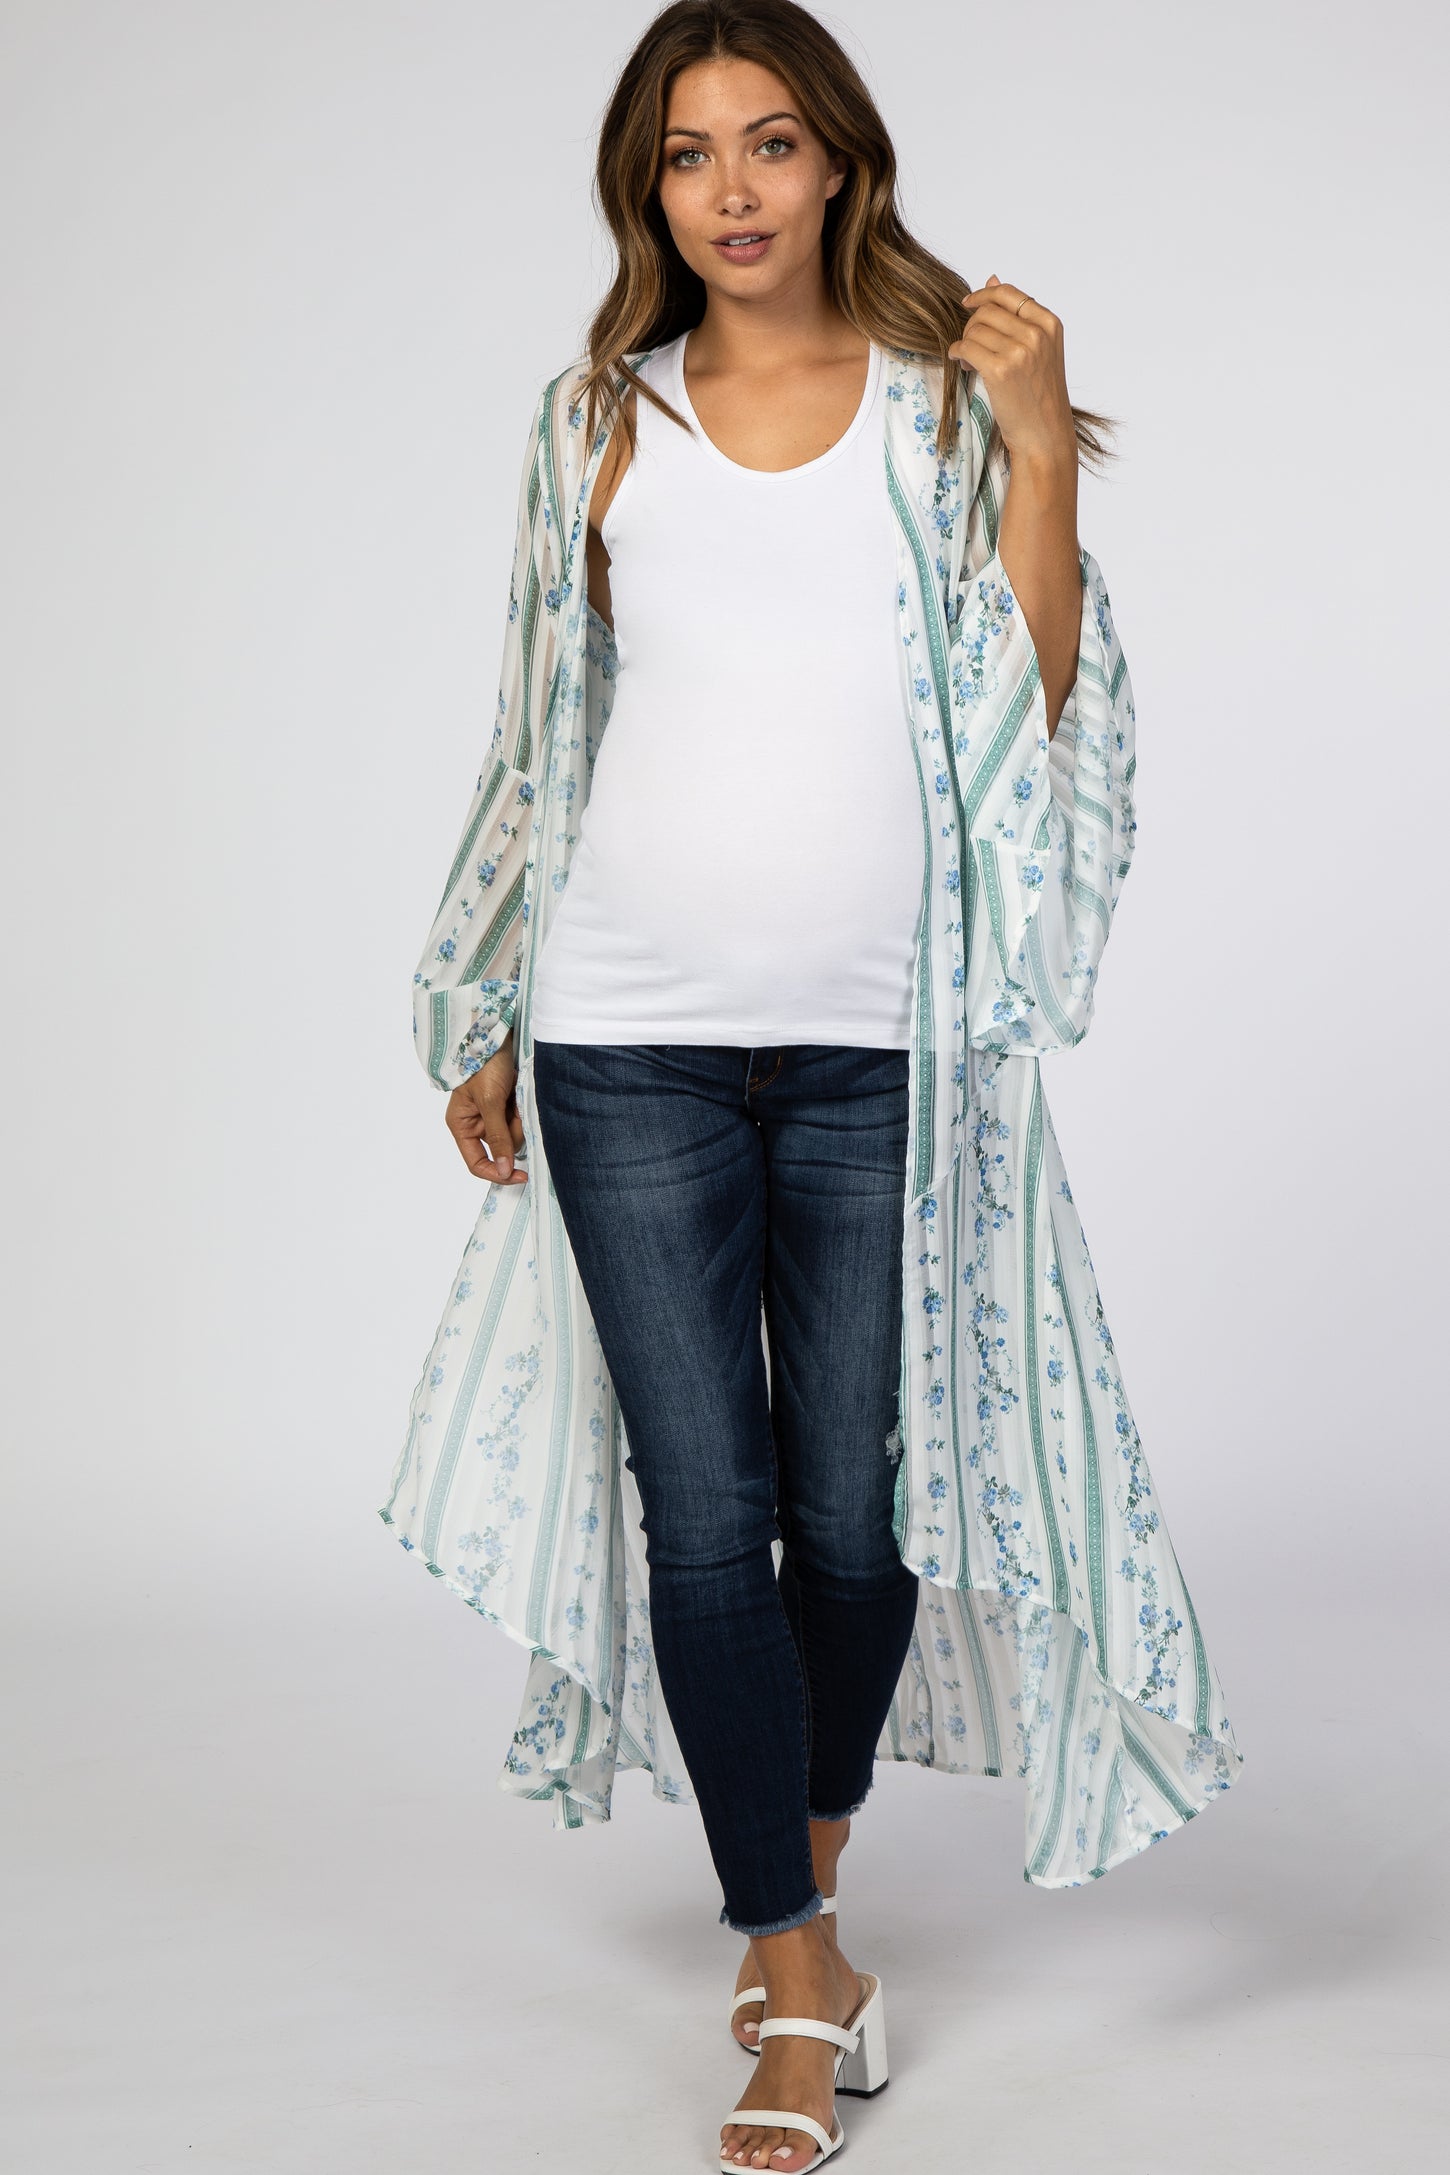 Ivory Floral Long Maternity Cover Up